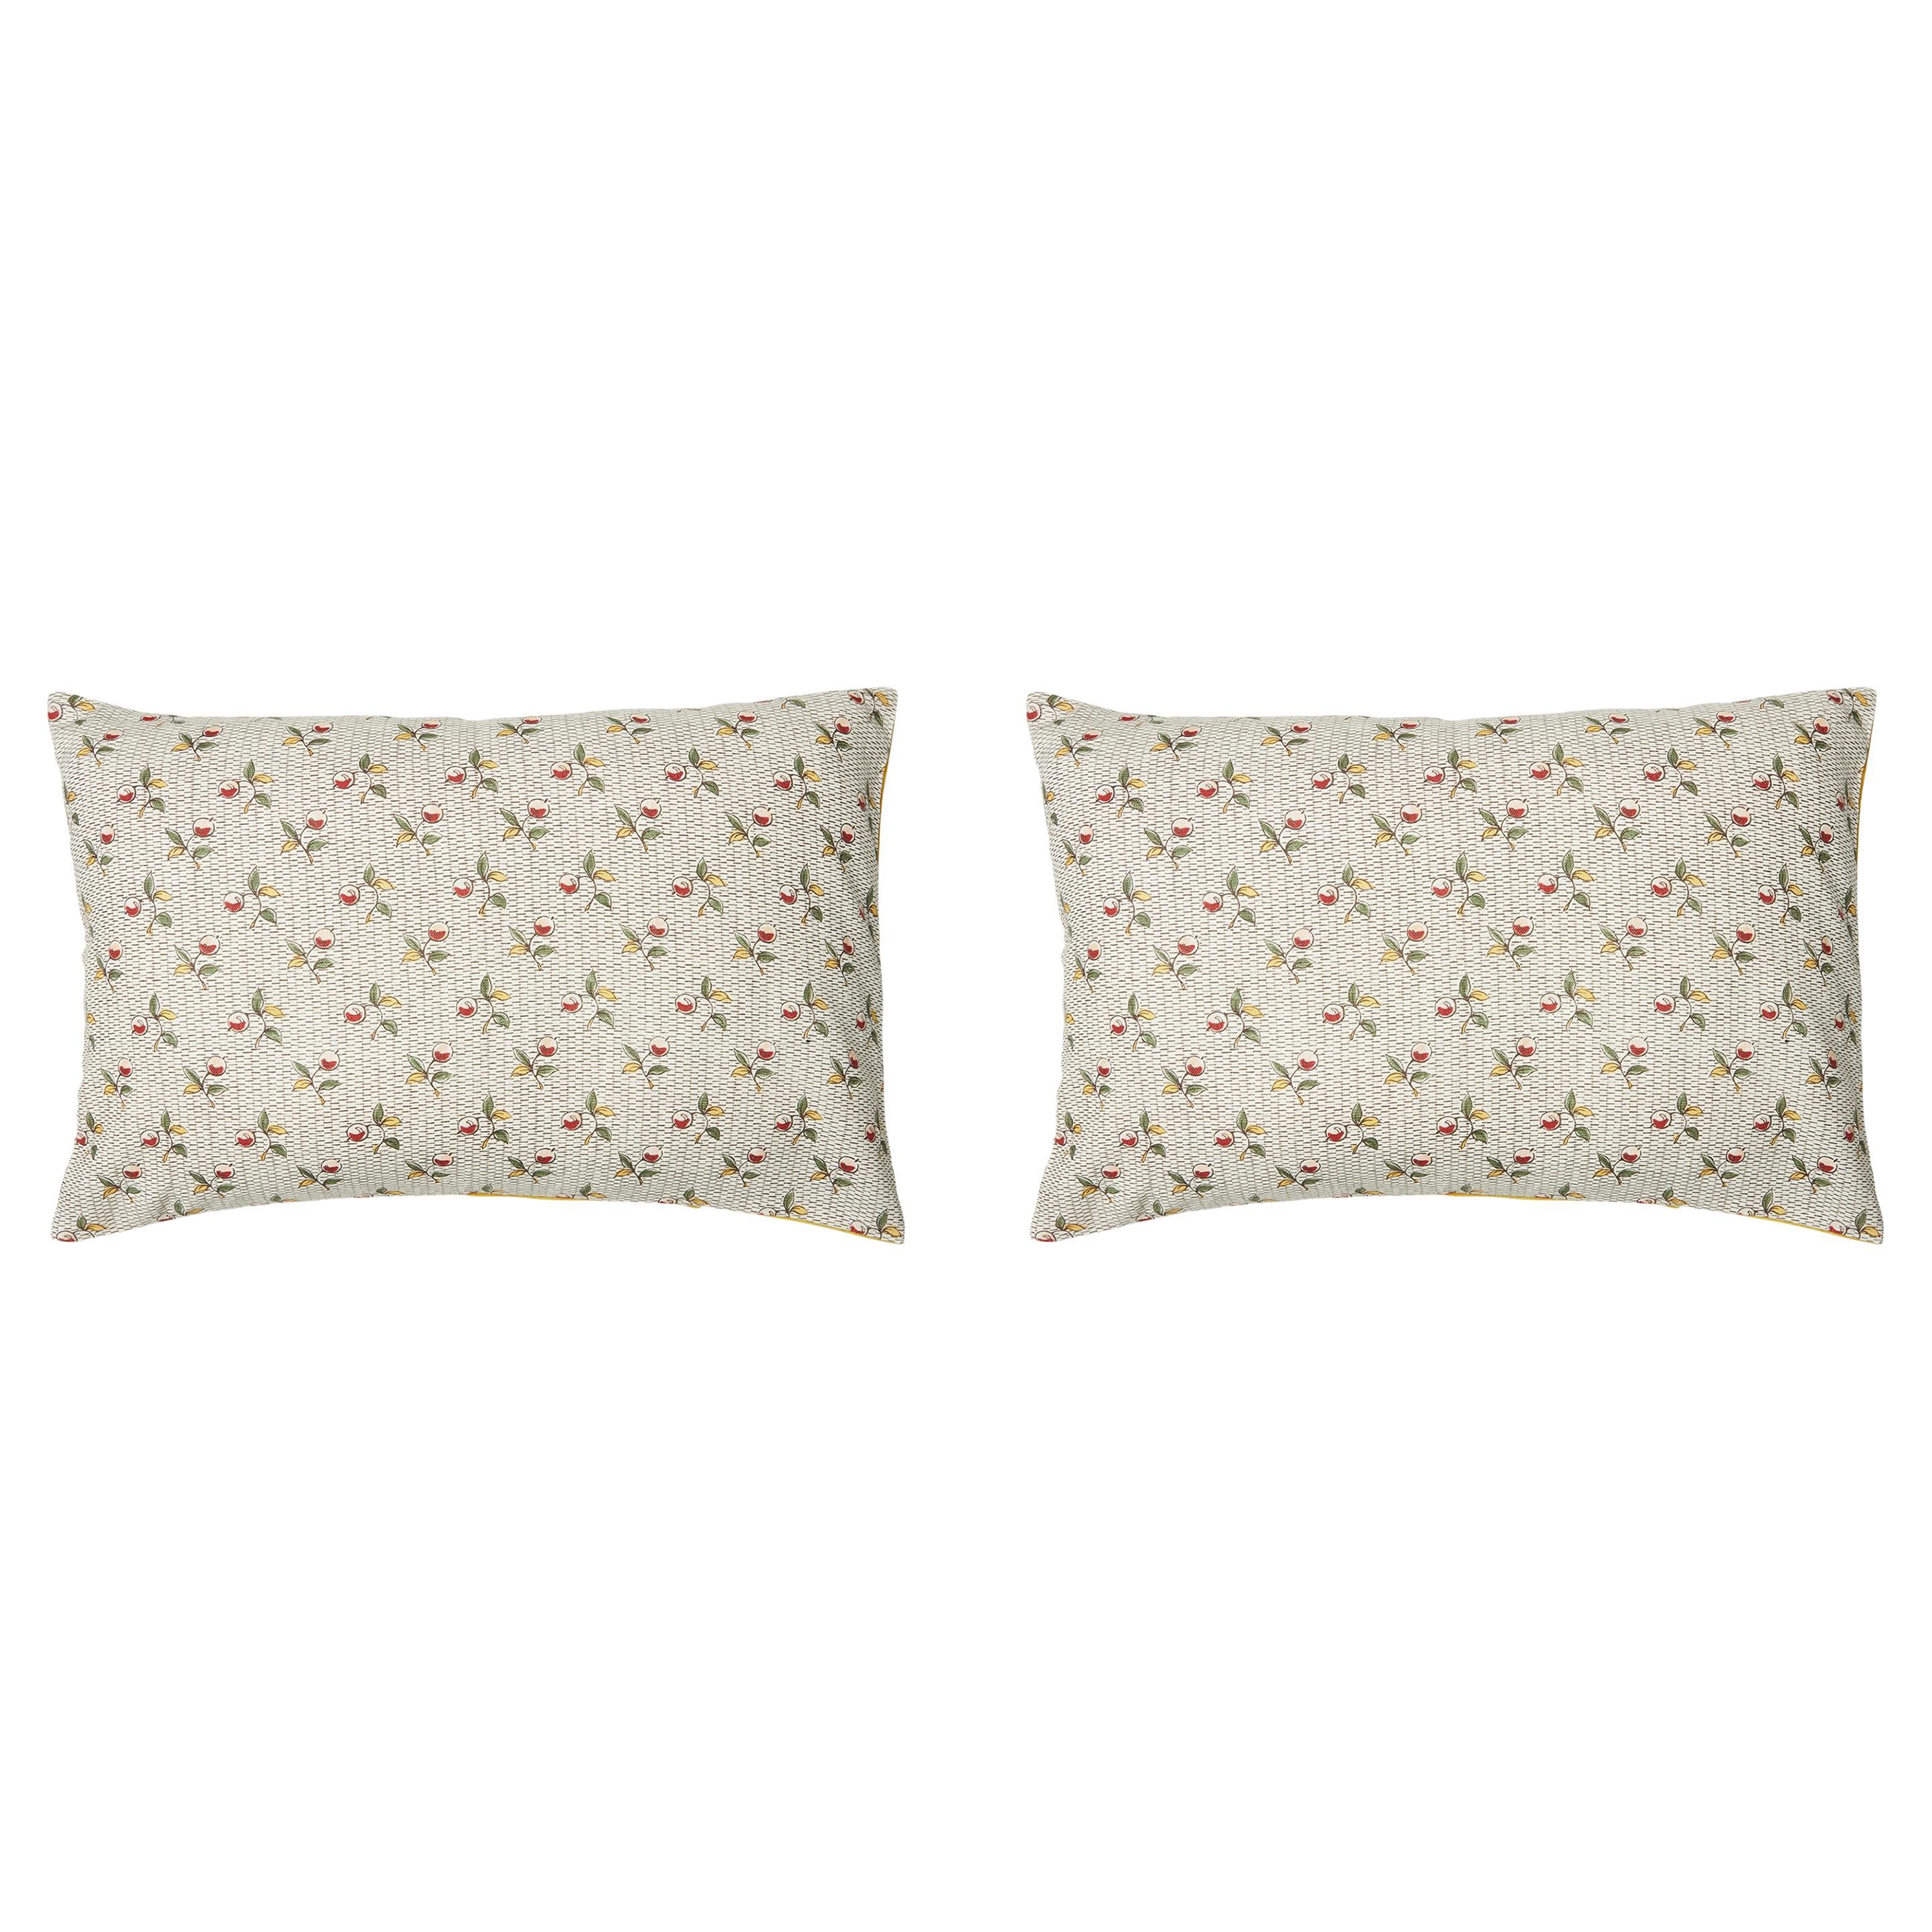 Pair of Linen Pillow Cushions - Baies Pattern - Designed and Made in Paris